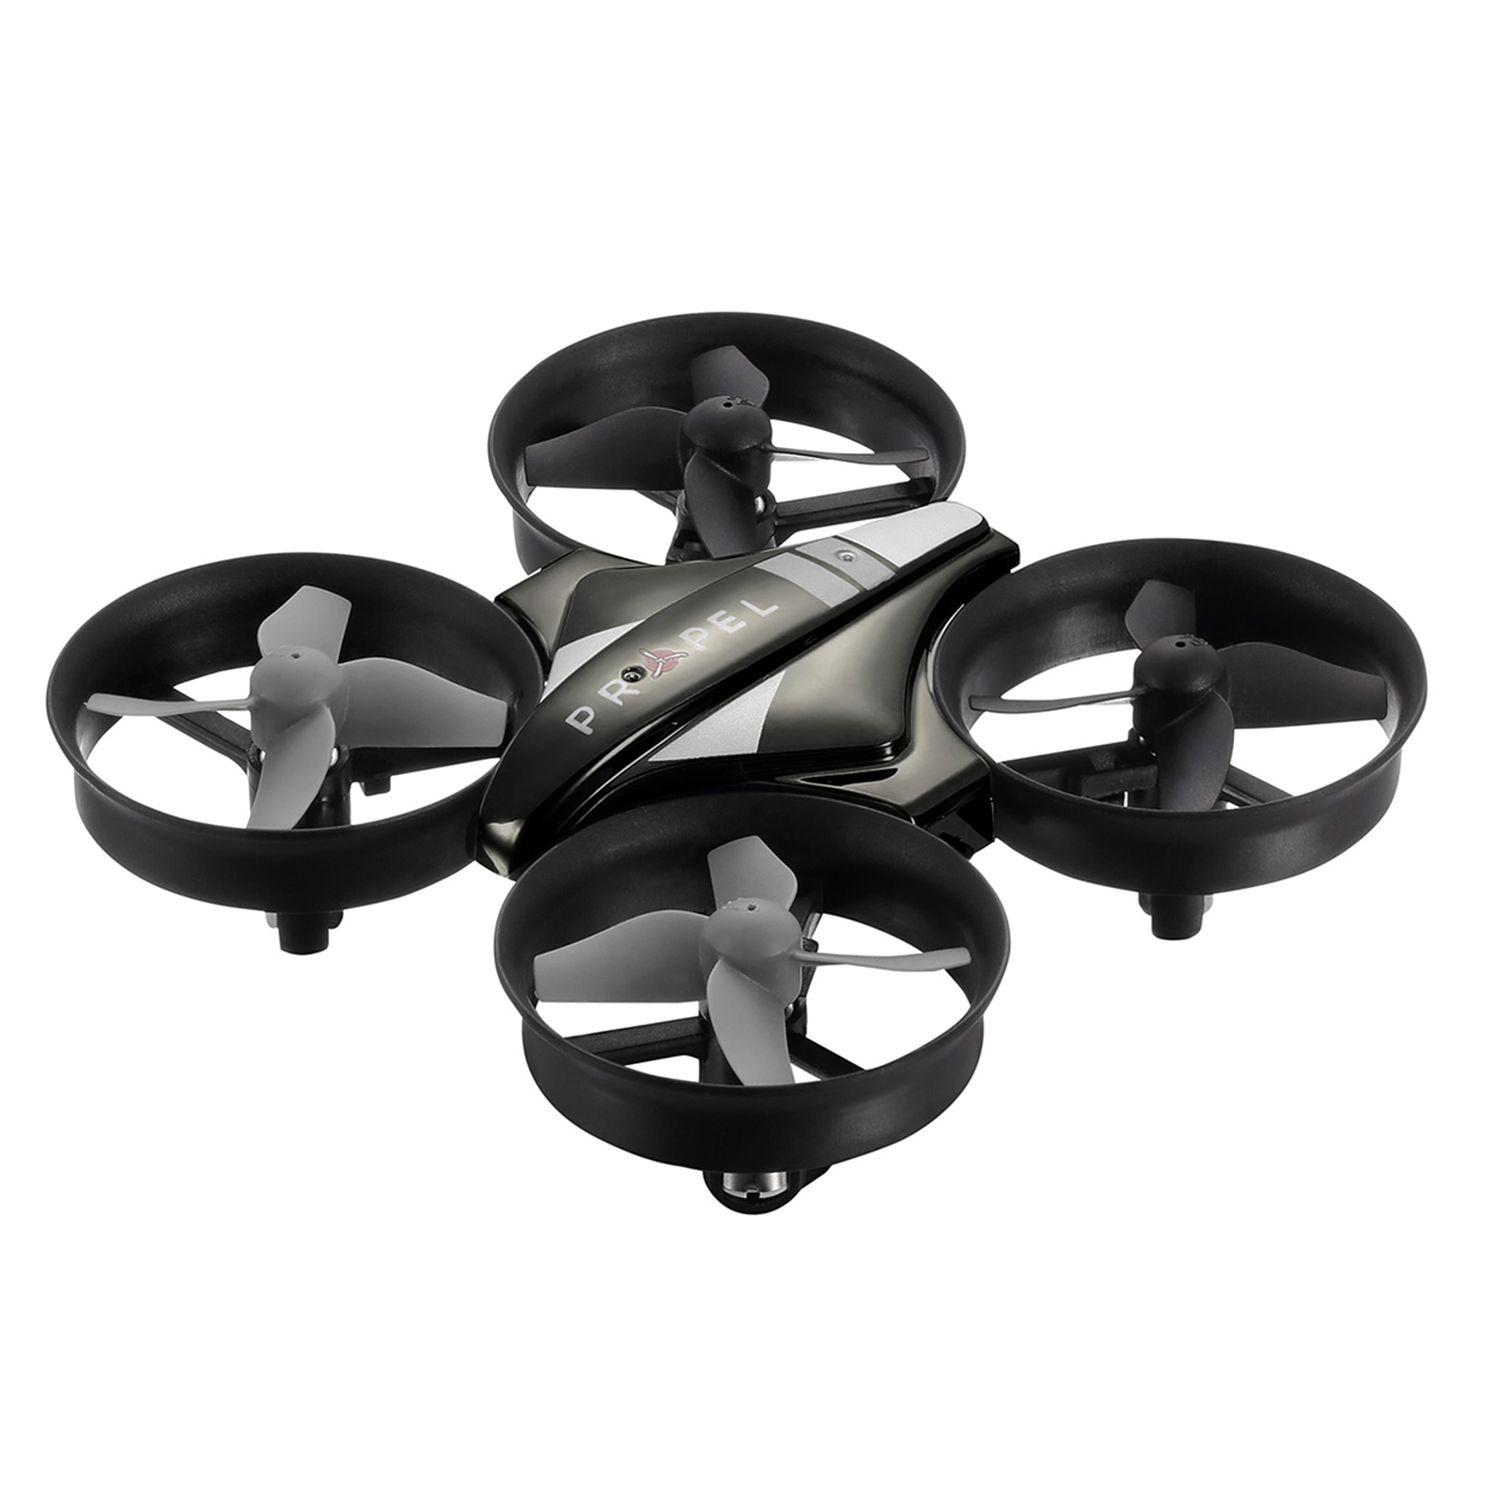 propel tunnel drone review